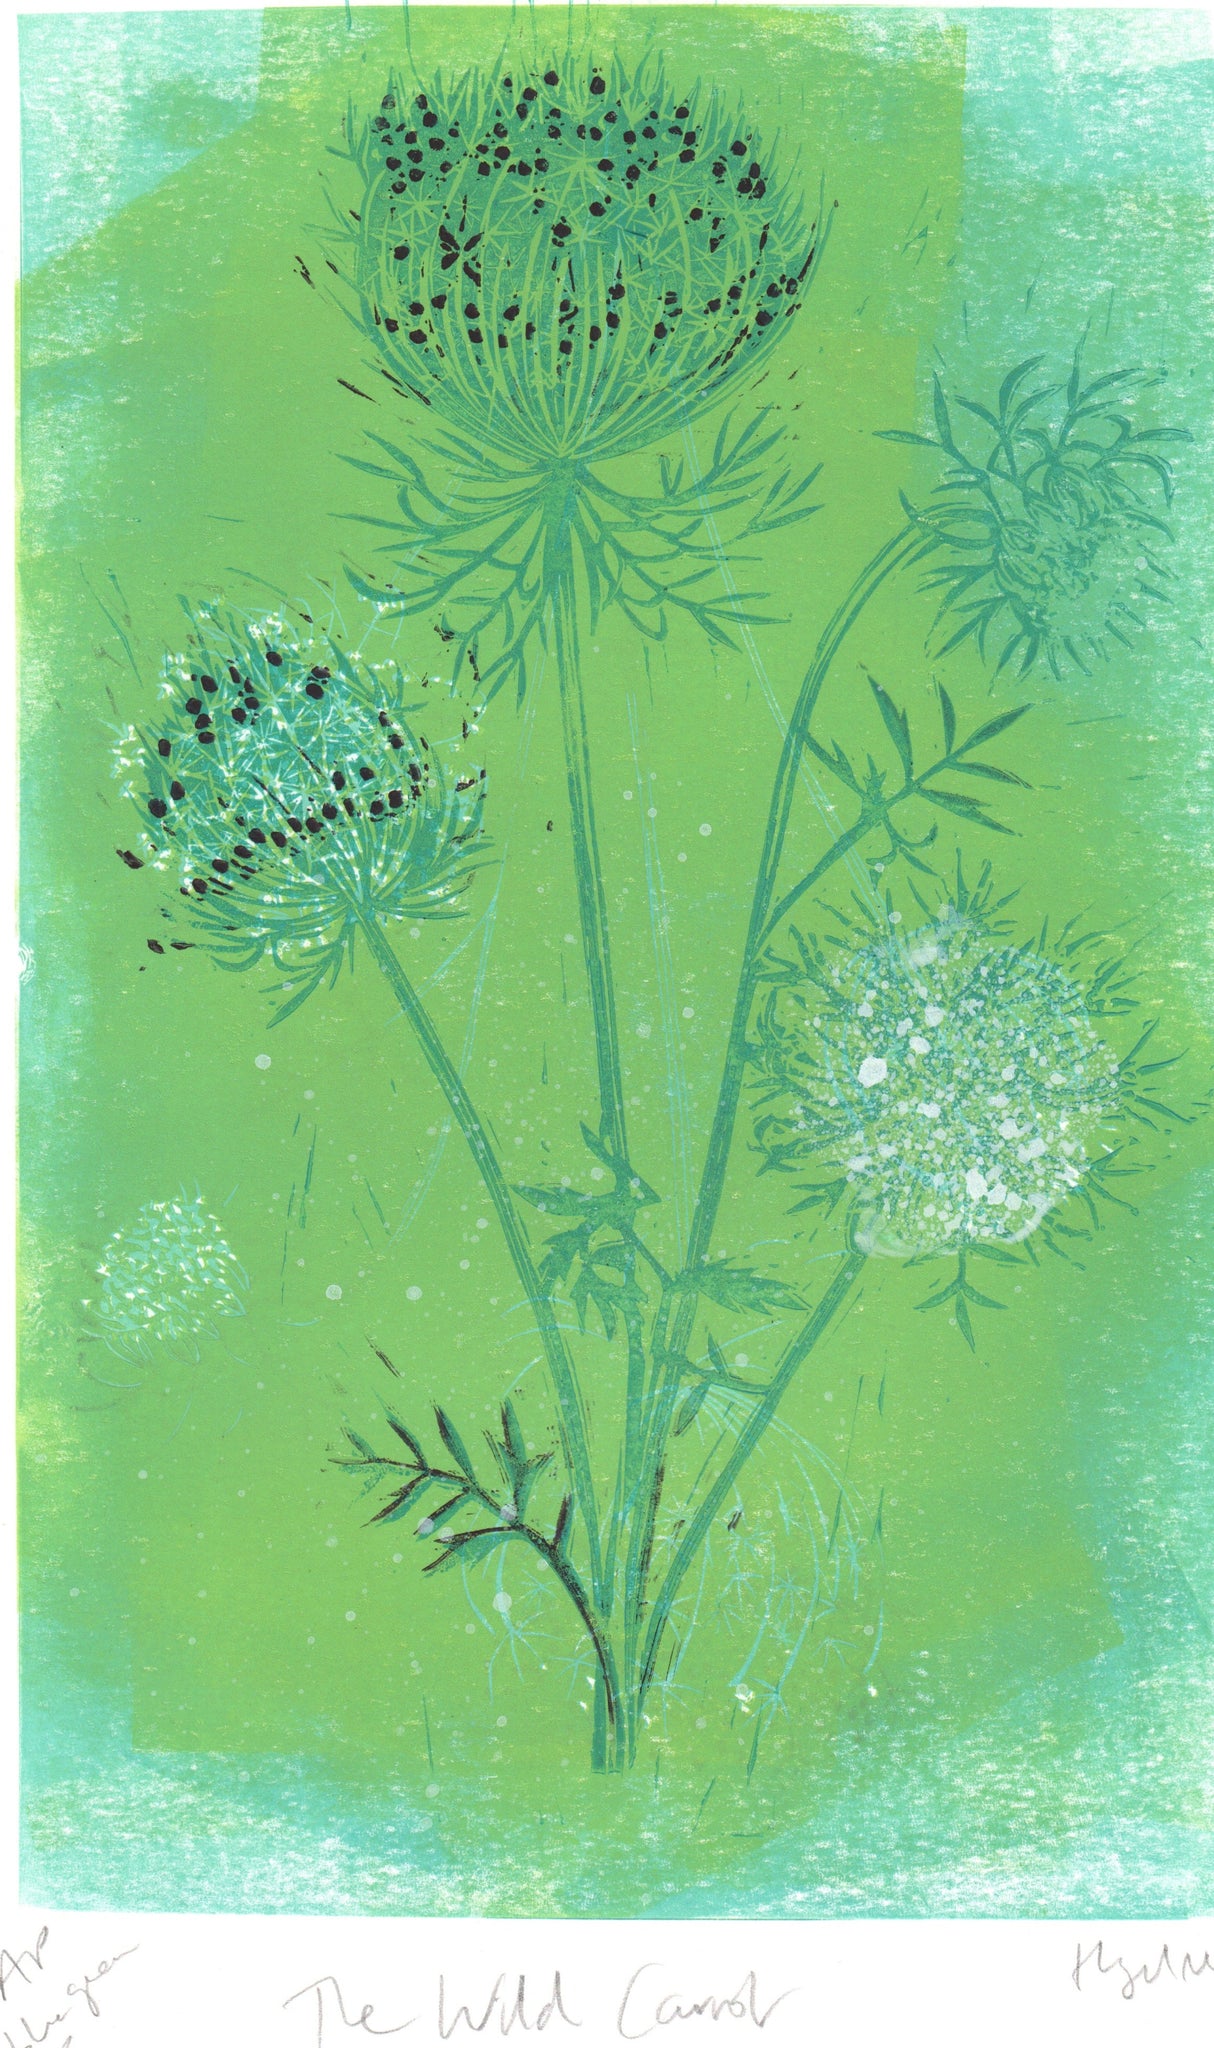 The Wild Carrot APblue,green3